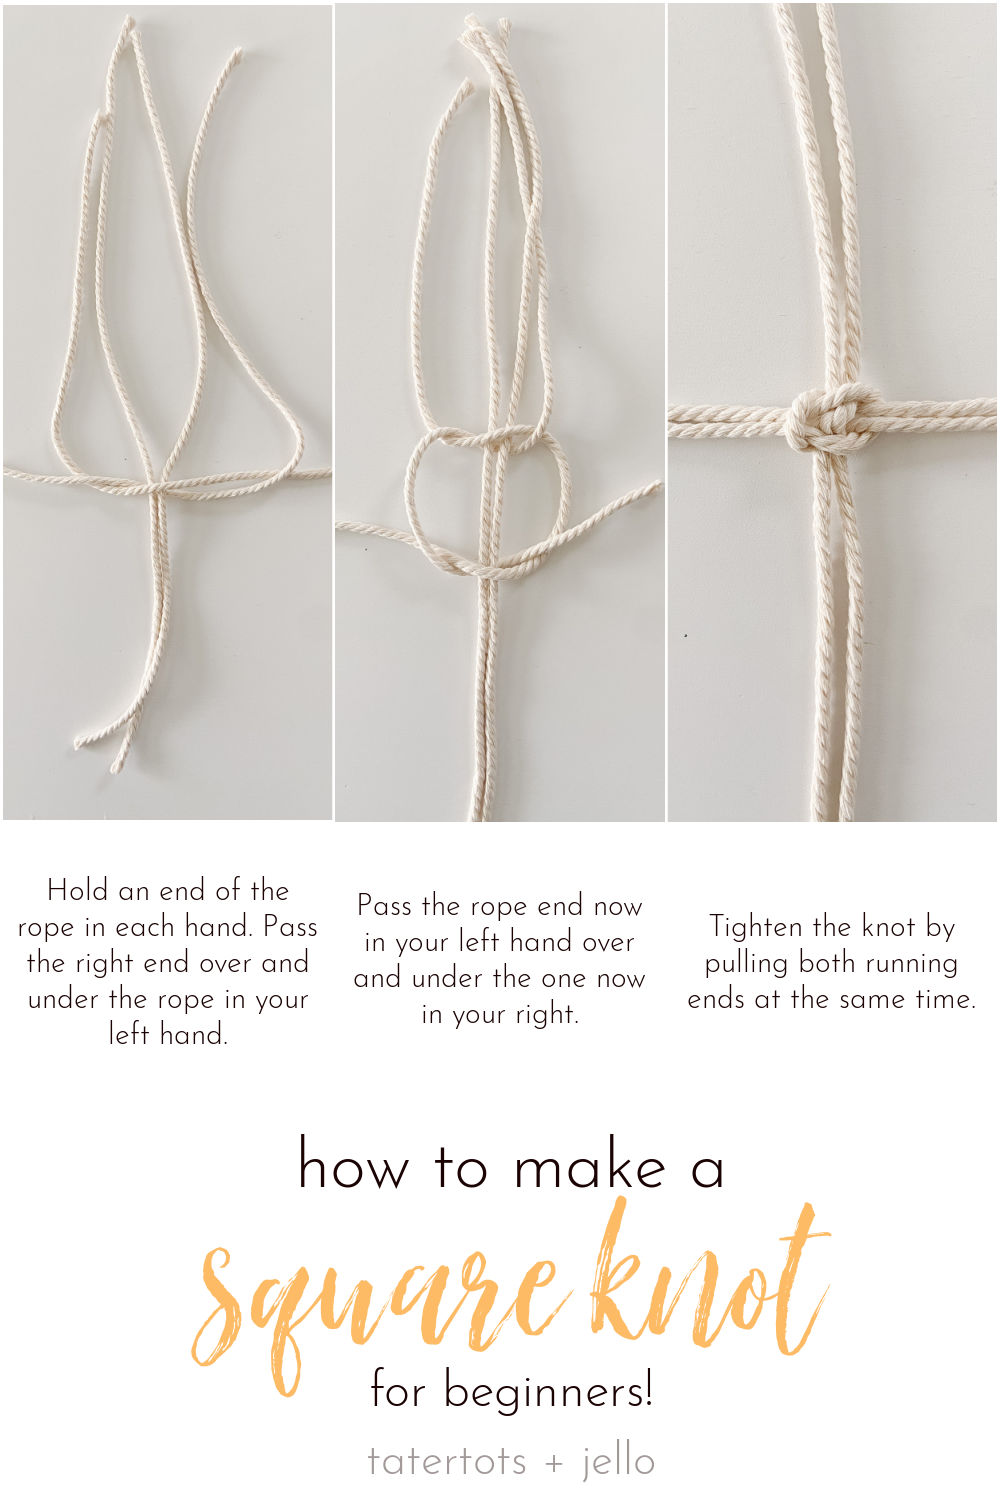 Make a Macrame Market Bag for Beginners! One of the best parts of spring and summer is fresh produce at the farmer's market. Make an easy macrame market bag with this easy DIY! 